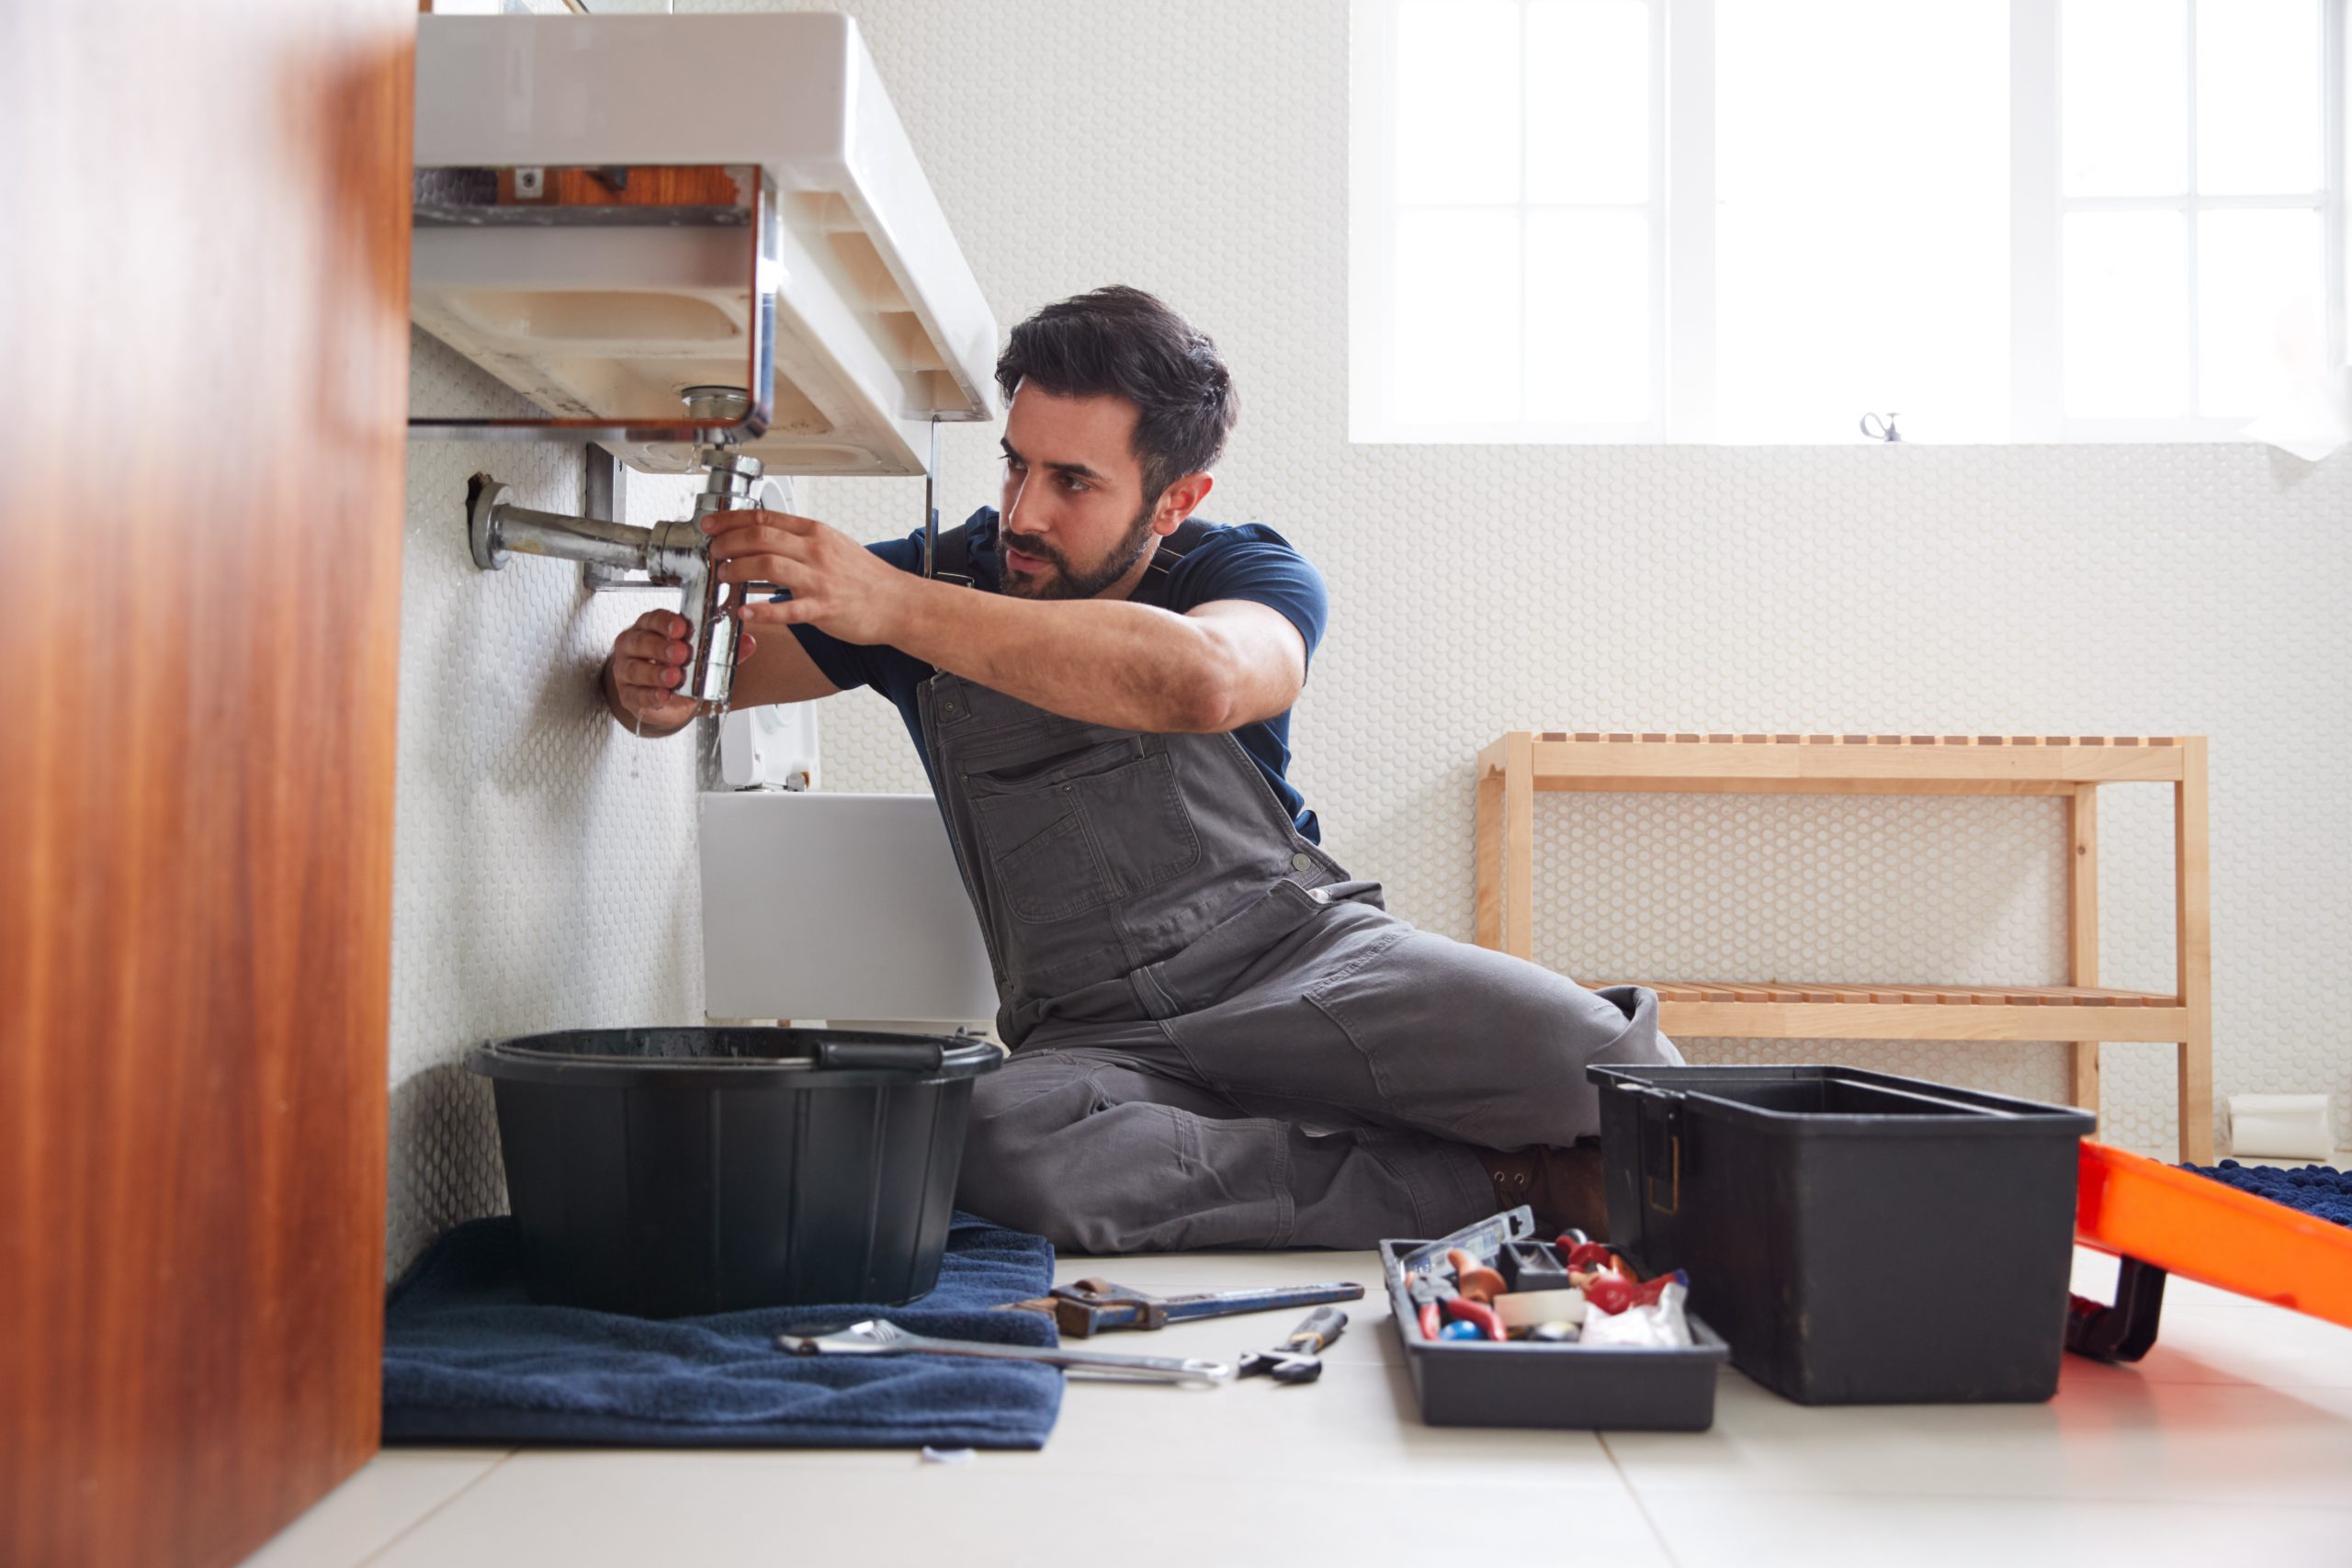 plumbing, electrical and bathroom installation services in Huntington, Brampton.